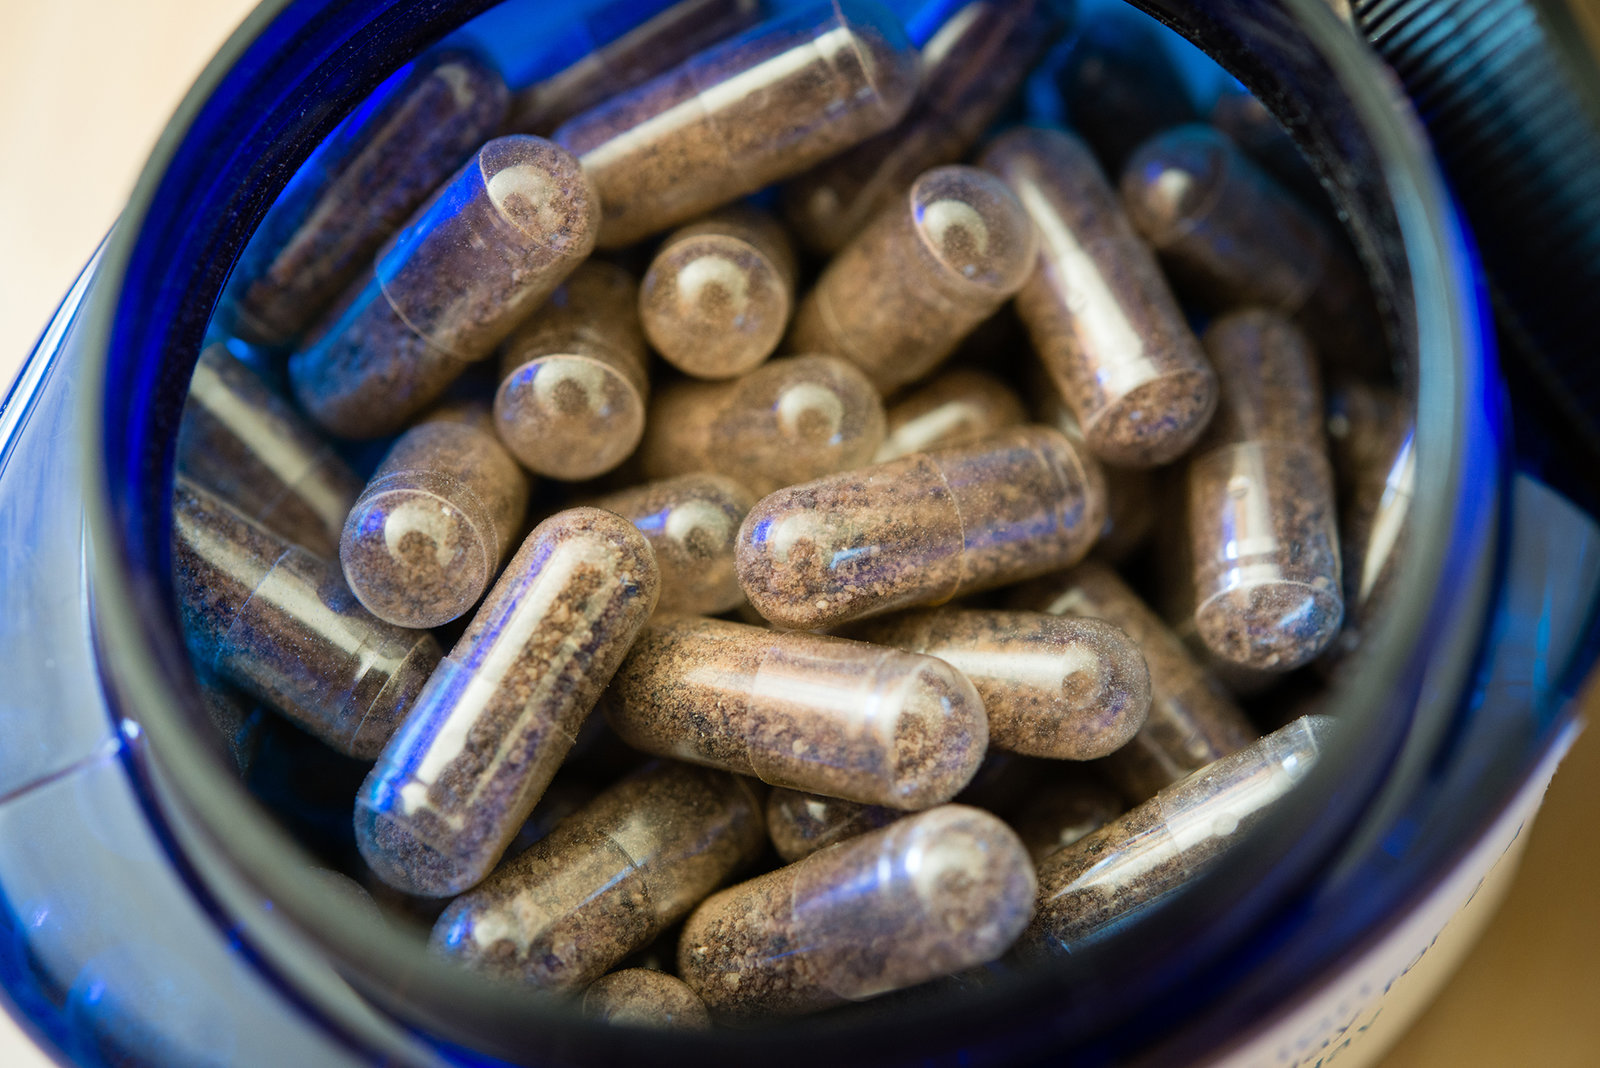 Pills are made from dehydrated placenta.